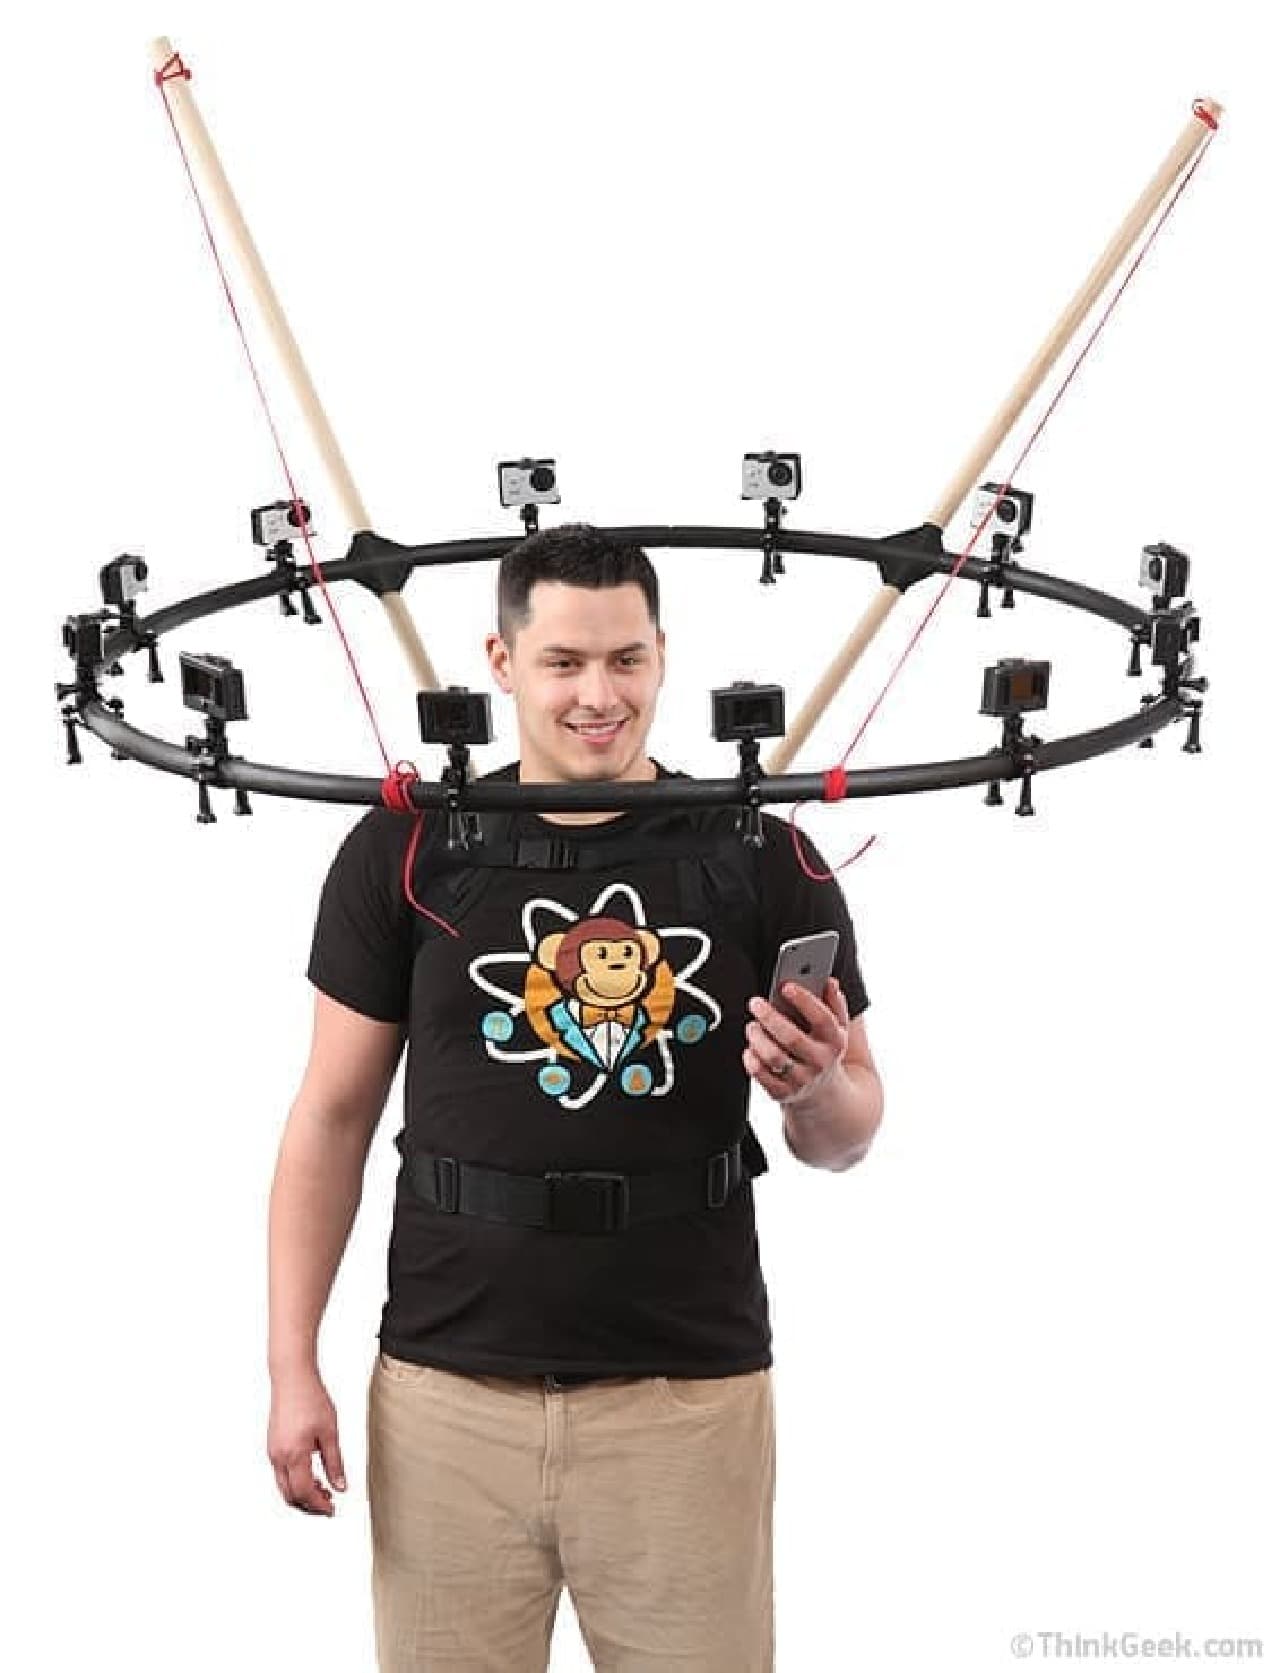 "360 Degree Selfie Rig" is a selfie stick that you can wear on your body with a belt. The long-awaited "complete hands-free" for selfie enthusiasts has been realized.